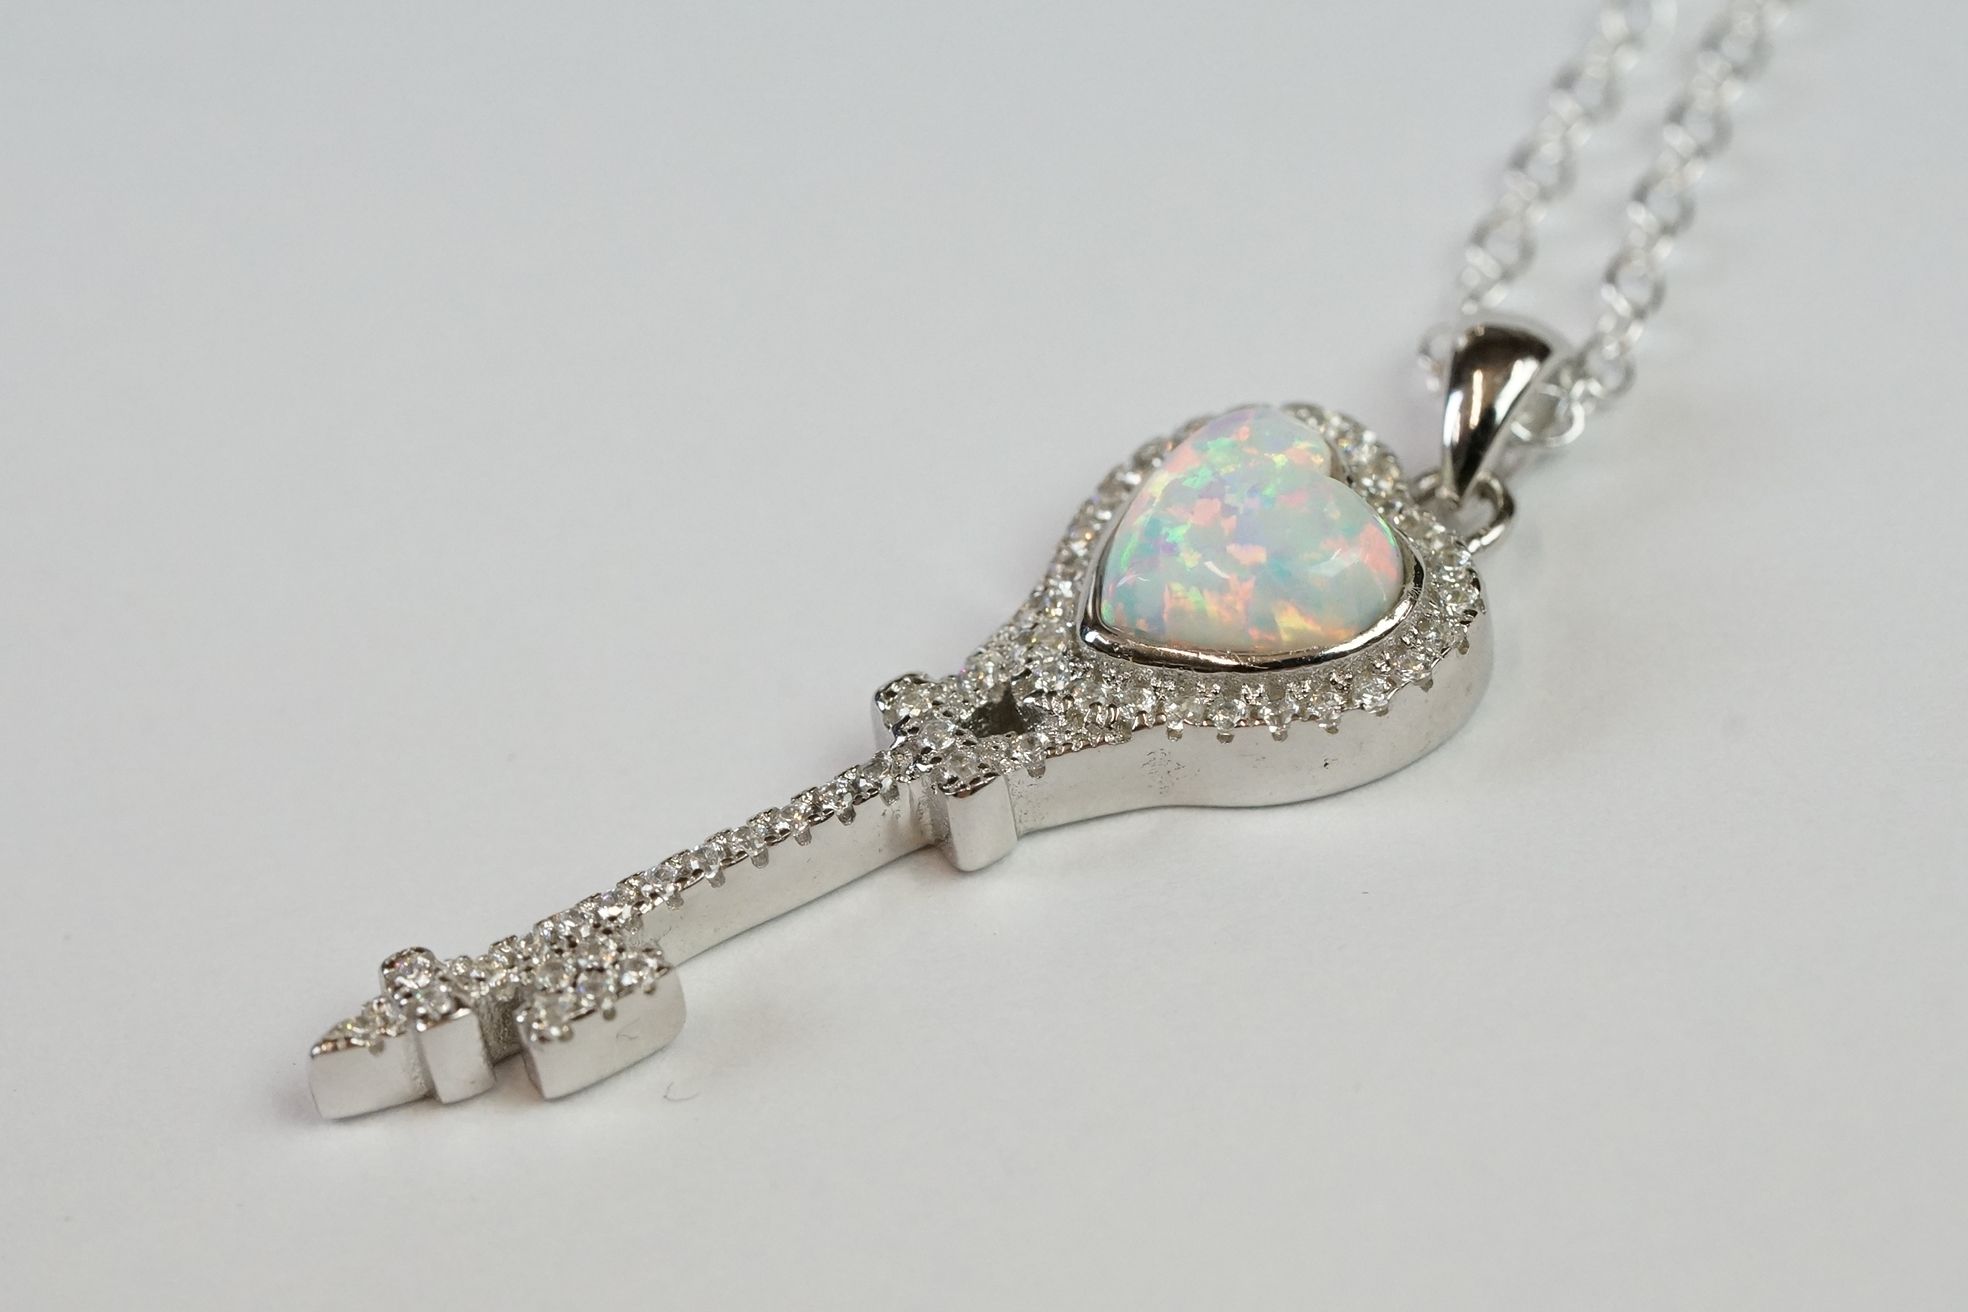 Silver CZ and Opal Key shaped Tiffany style Pendant Necklace - Image 2 of 7